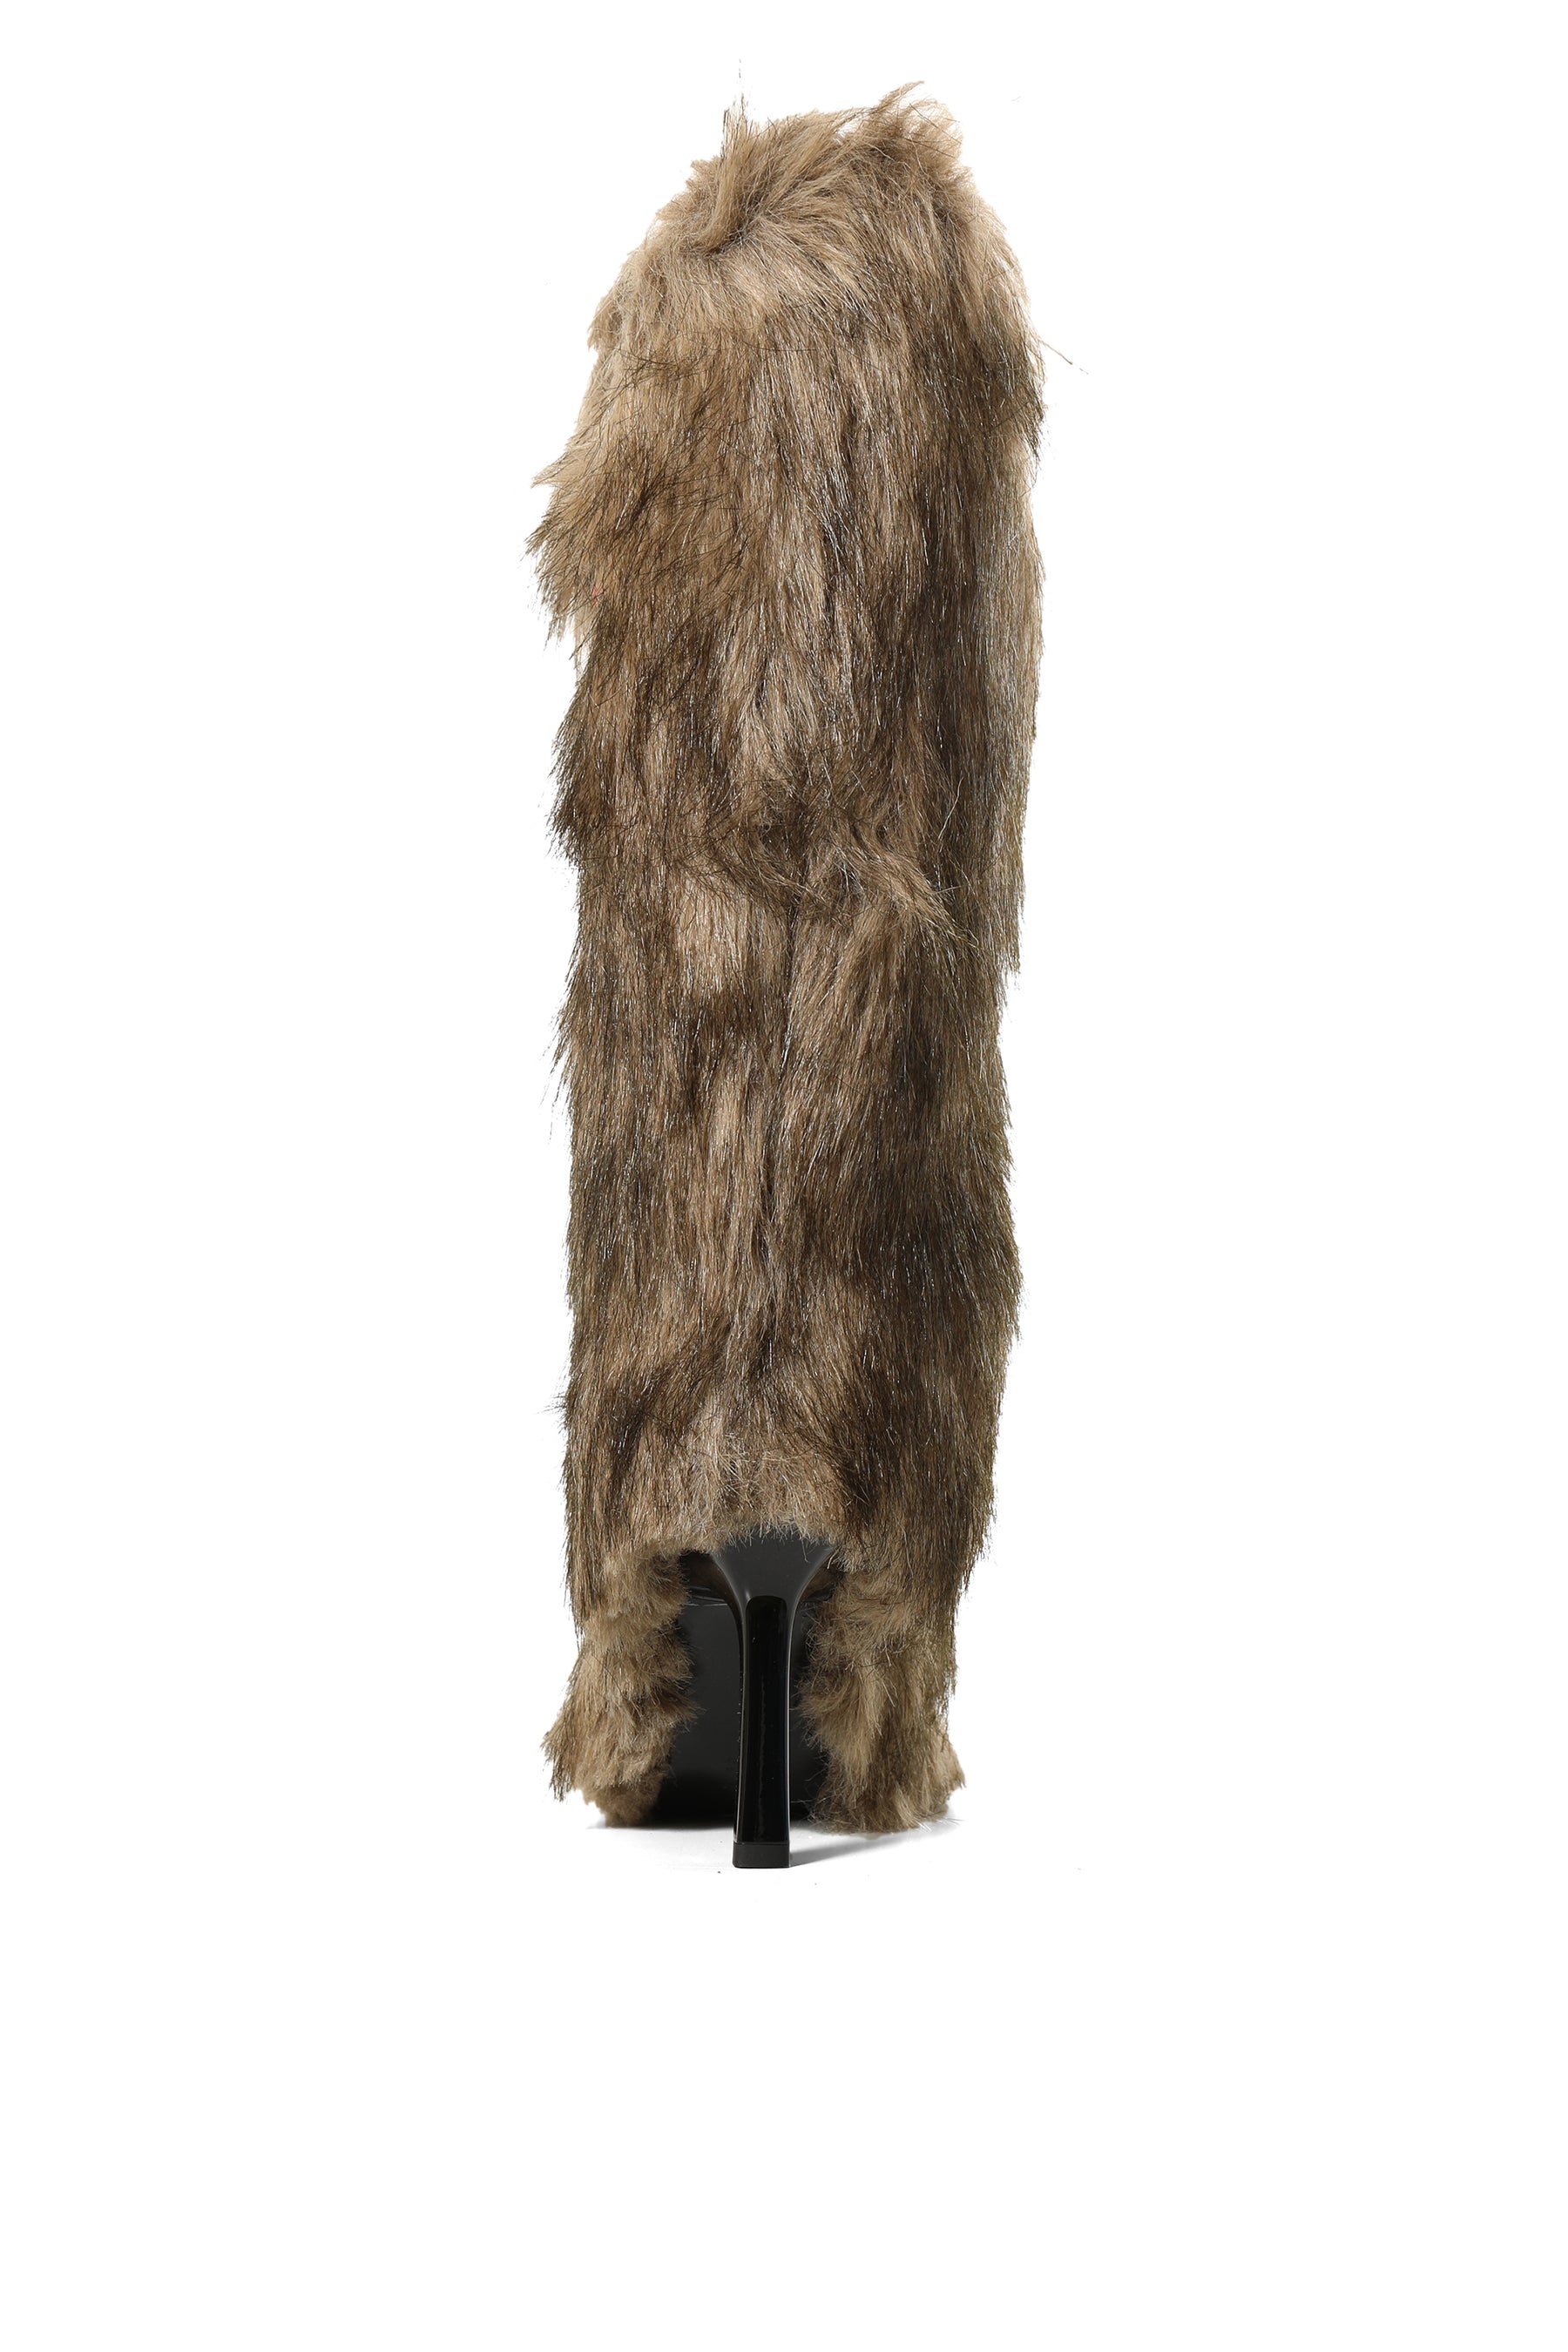 FUZZY BROWN KNEE HIGH BOOTS / BRW